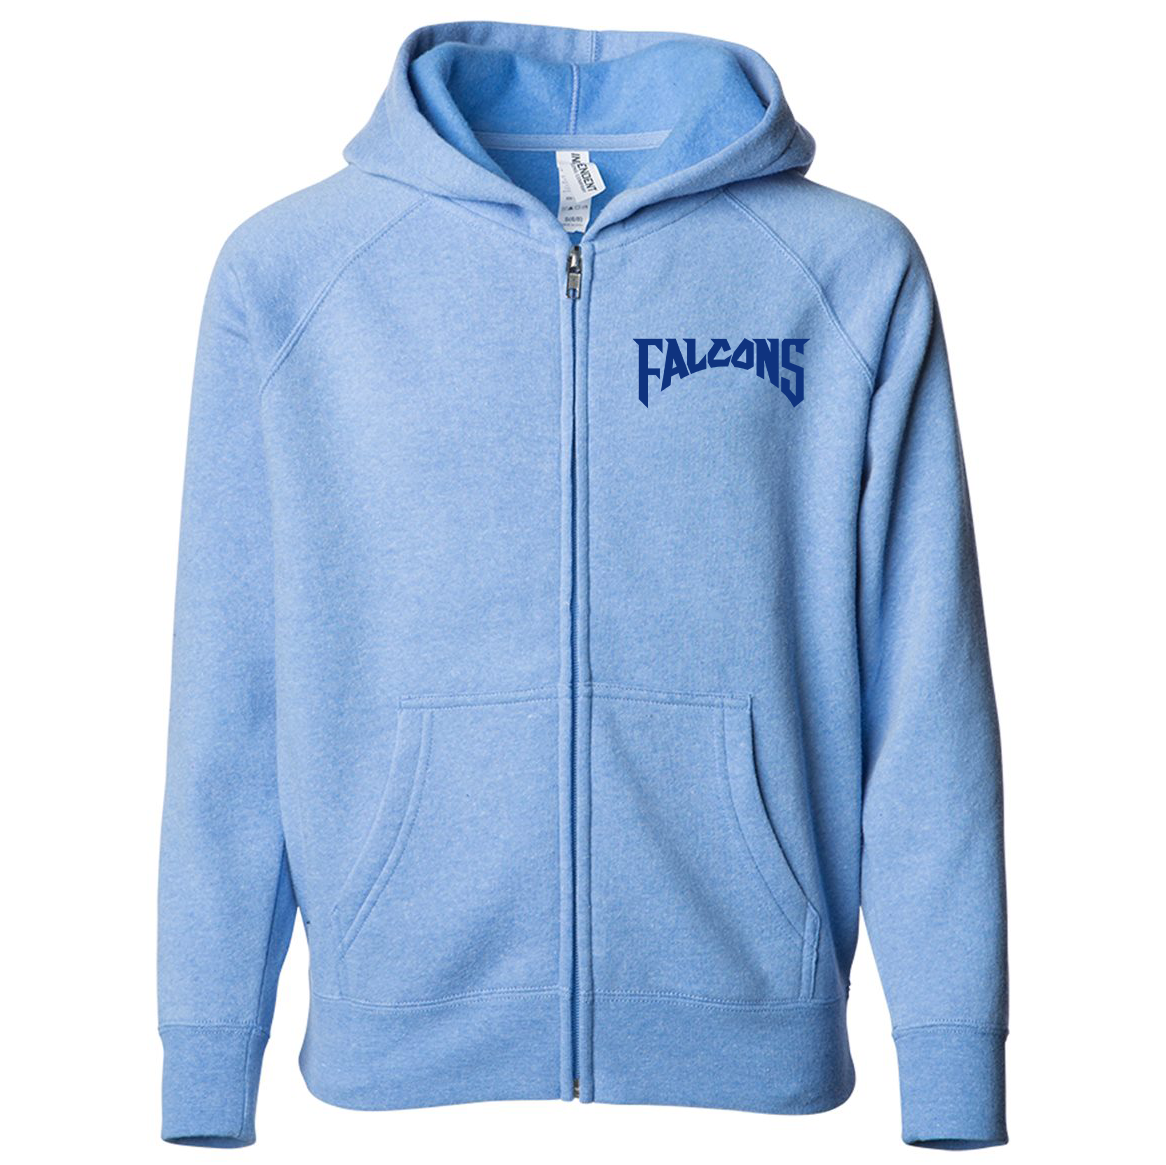 Falcons Ringettes Youth Special Blend Raglan Zip Hoodie